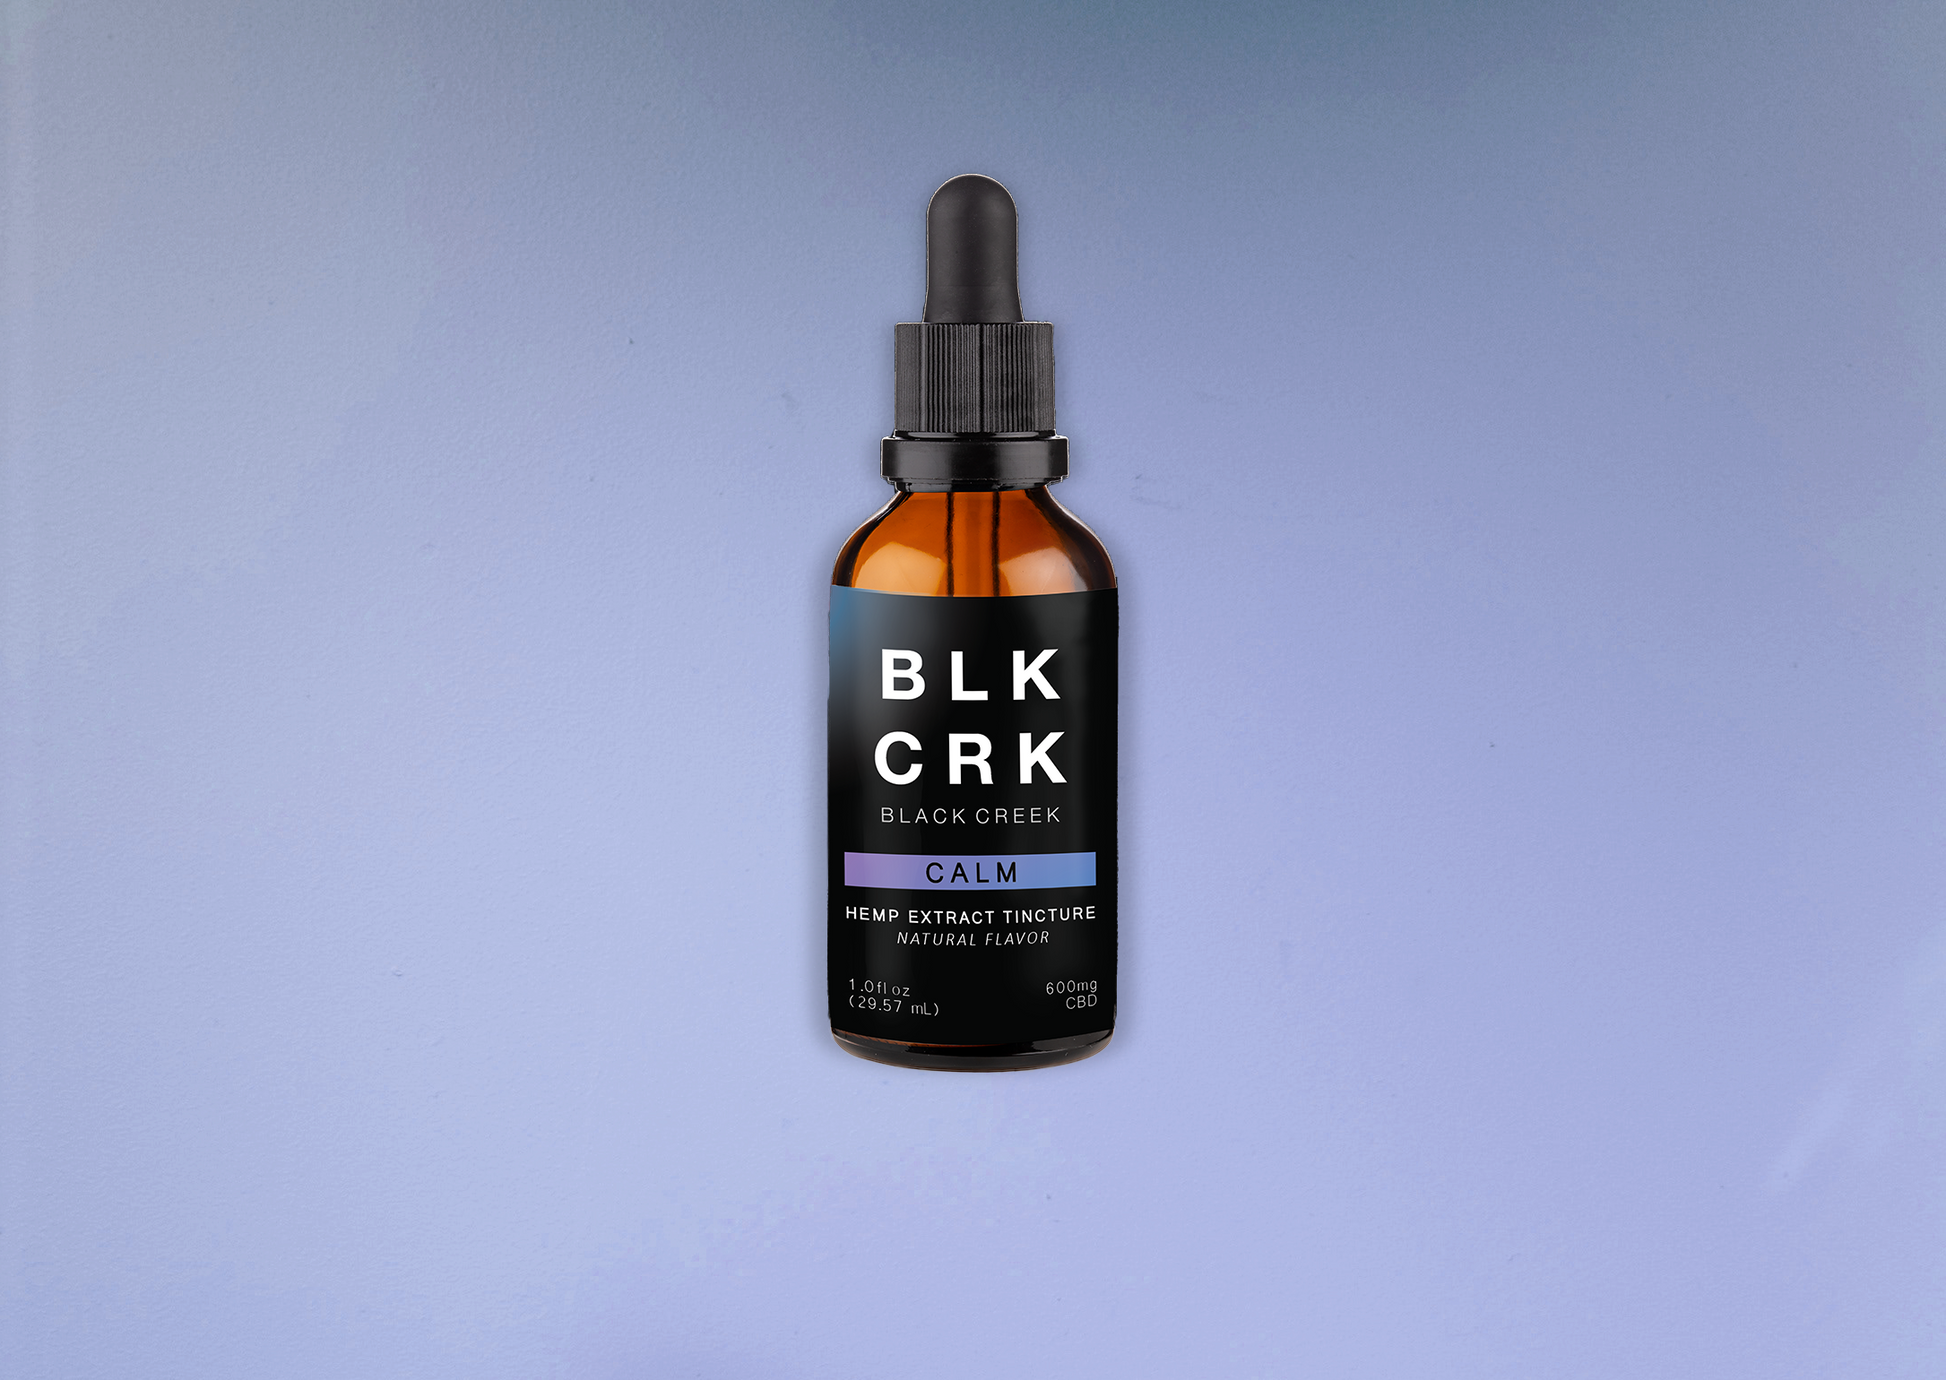 A picture of the Black Creek CBD Calm Tincture, 600mg on a pale powder blue / lavender background